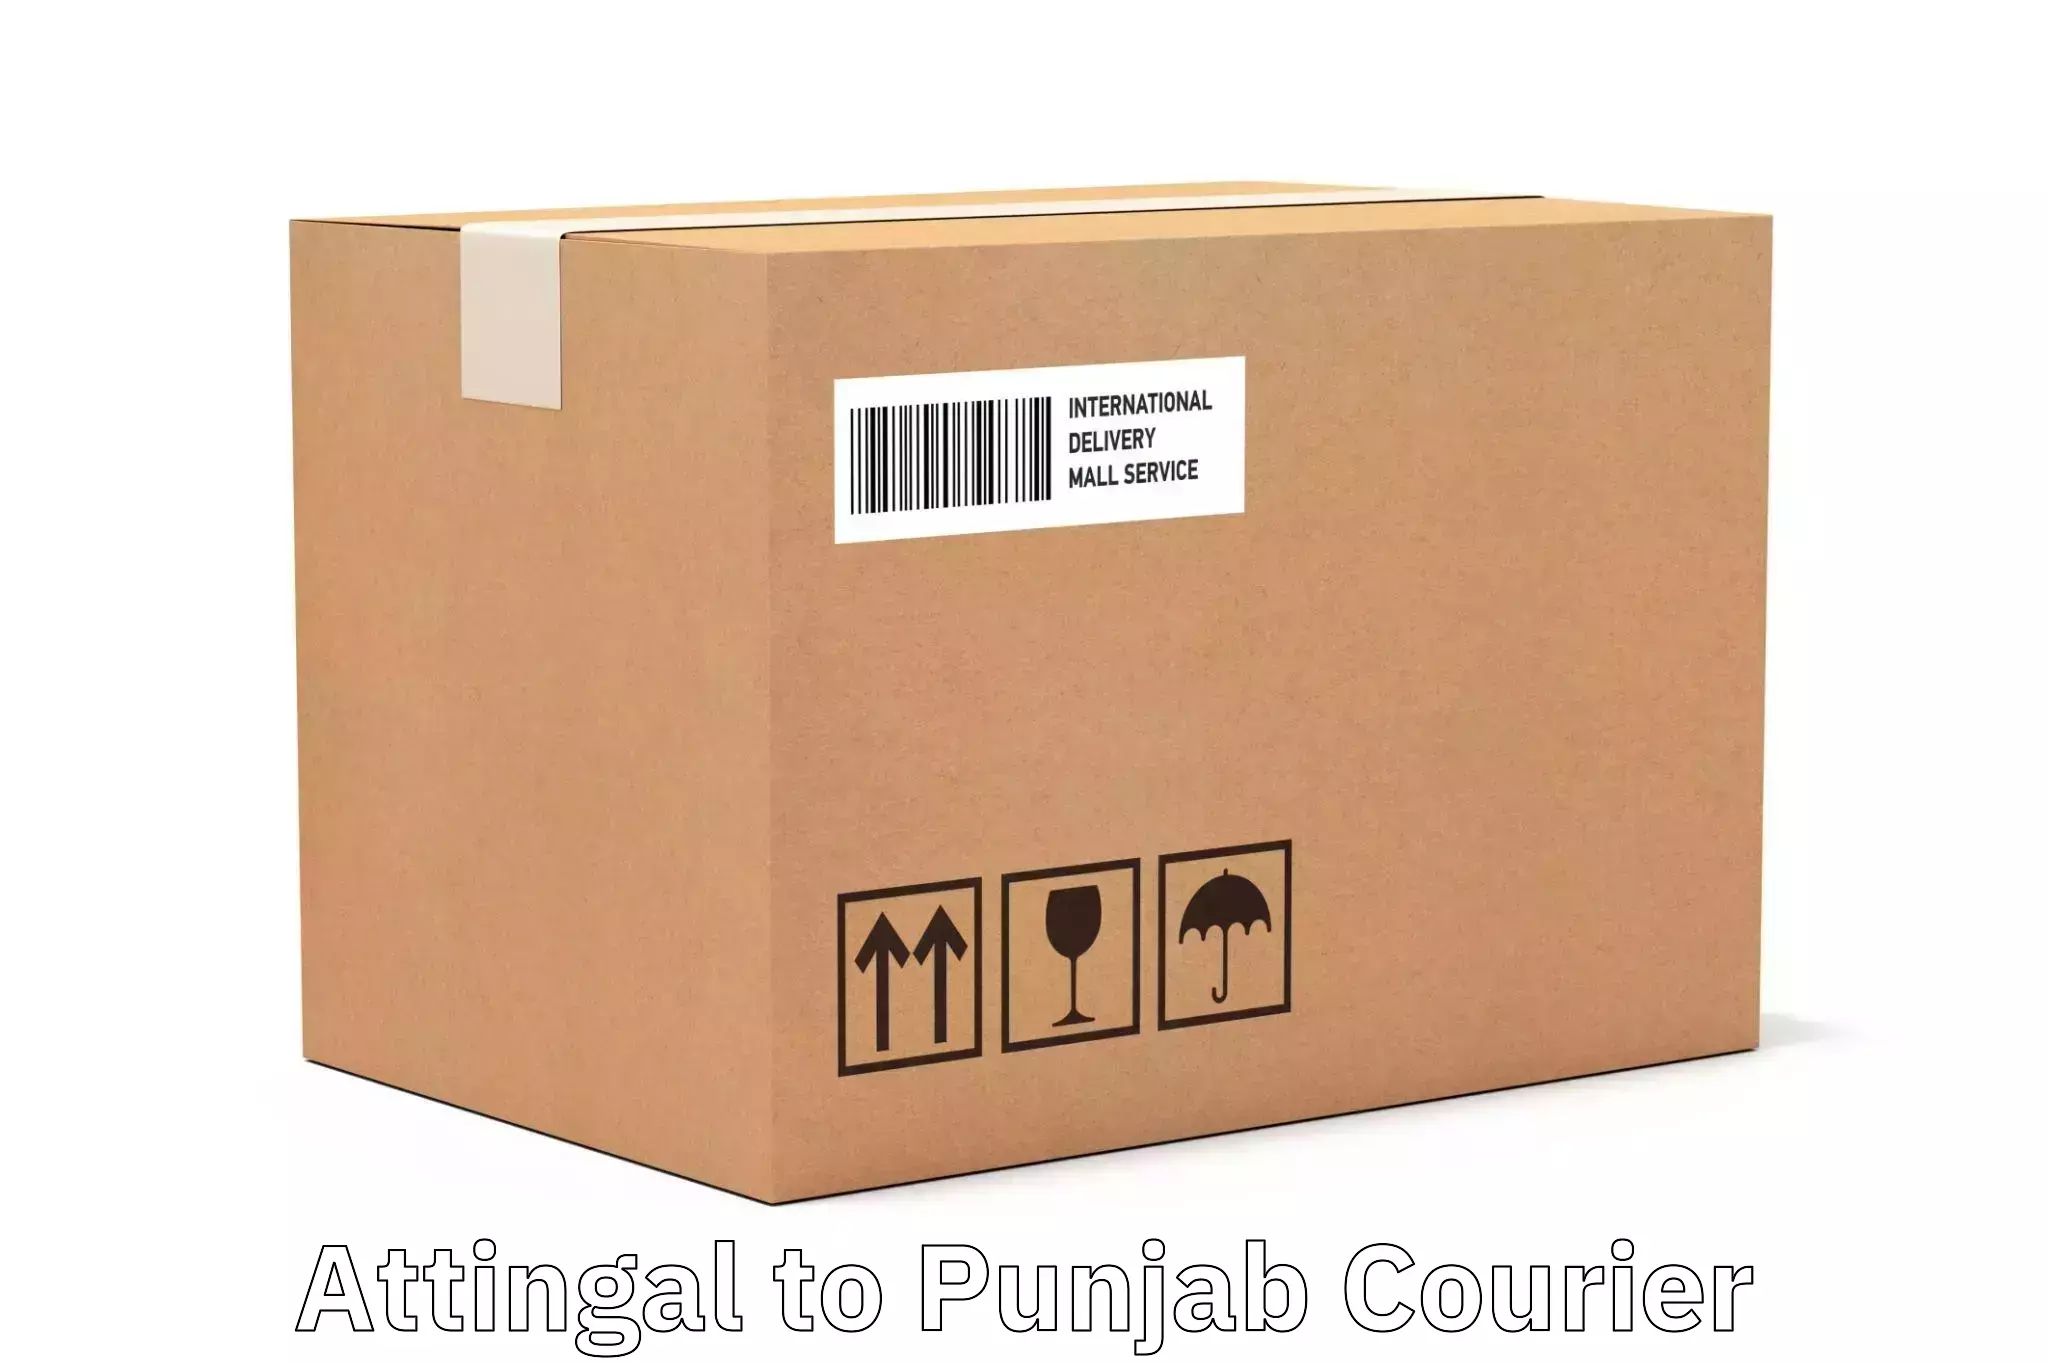 Cash on delivery service Attingal to Punjab